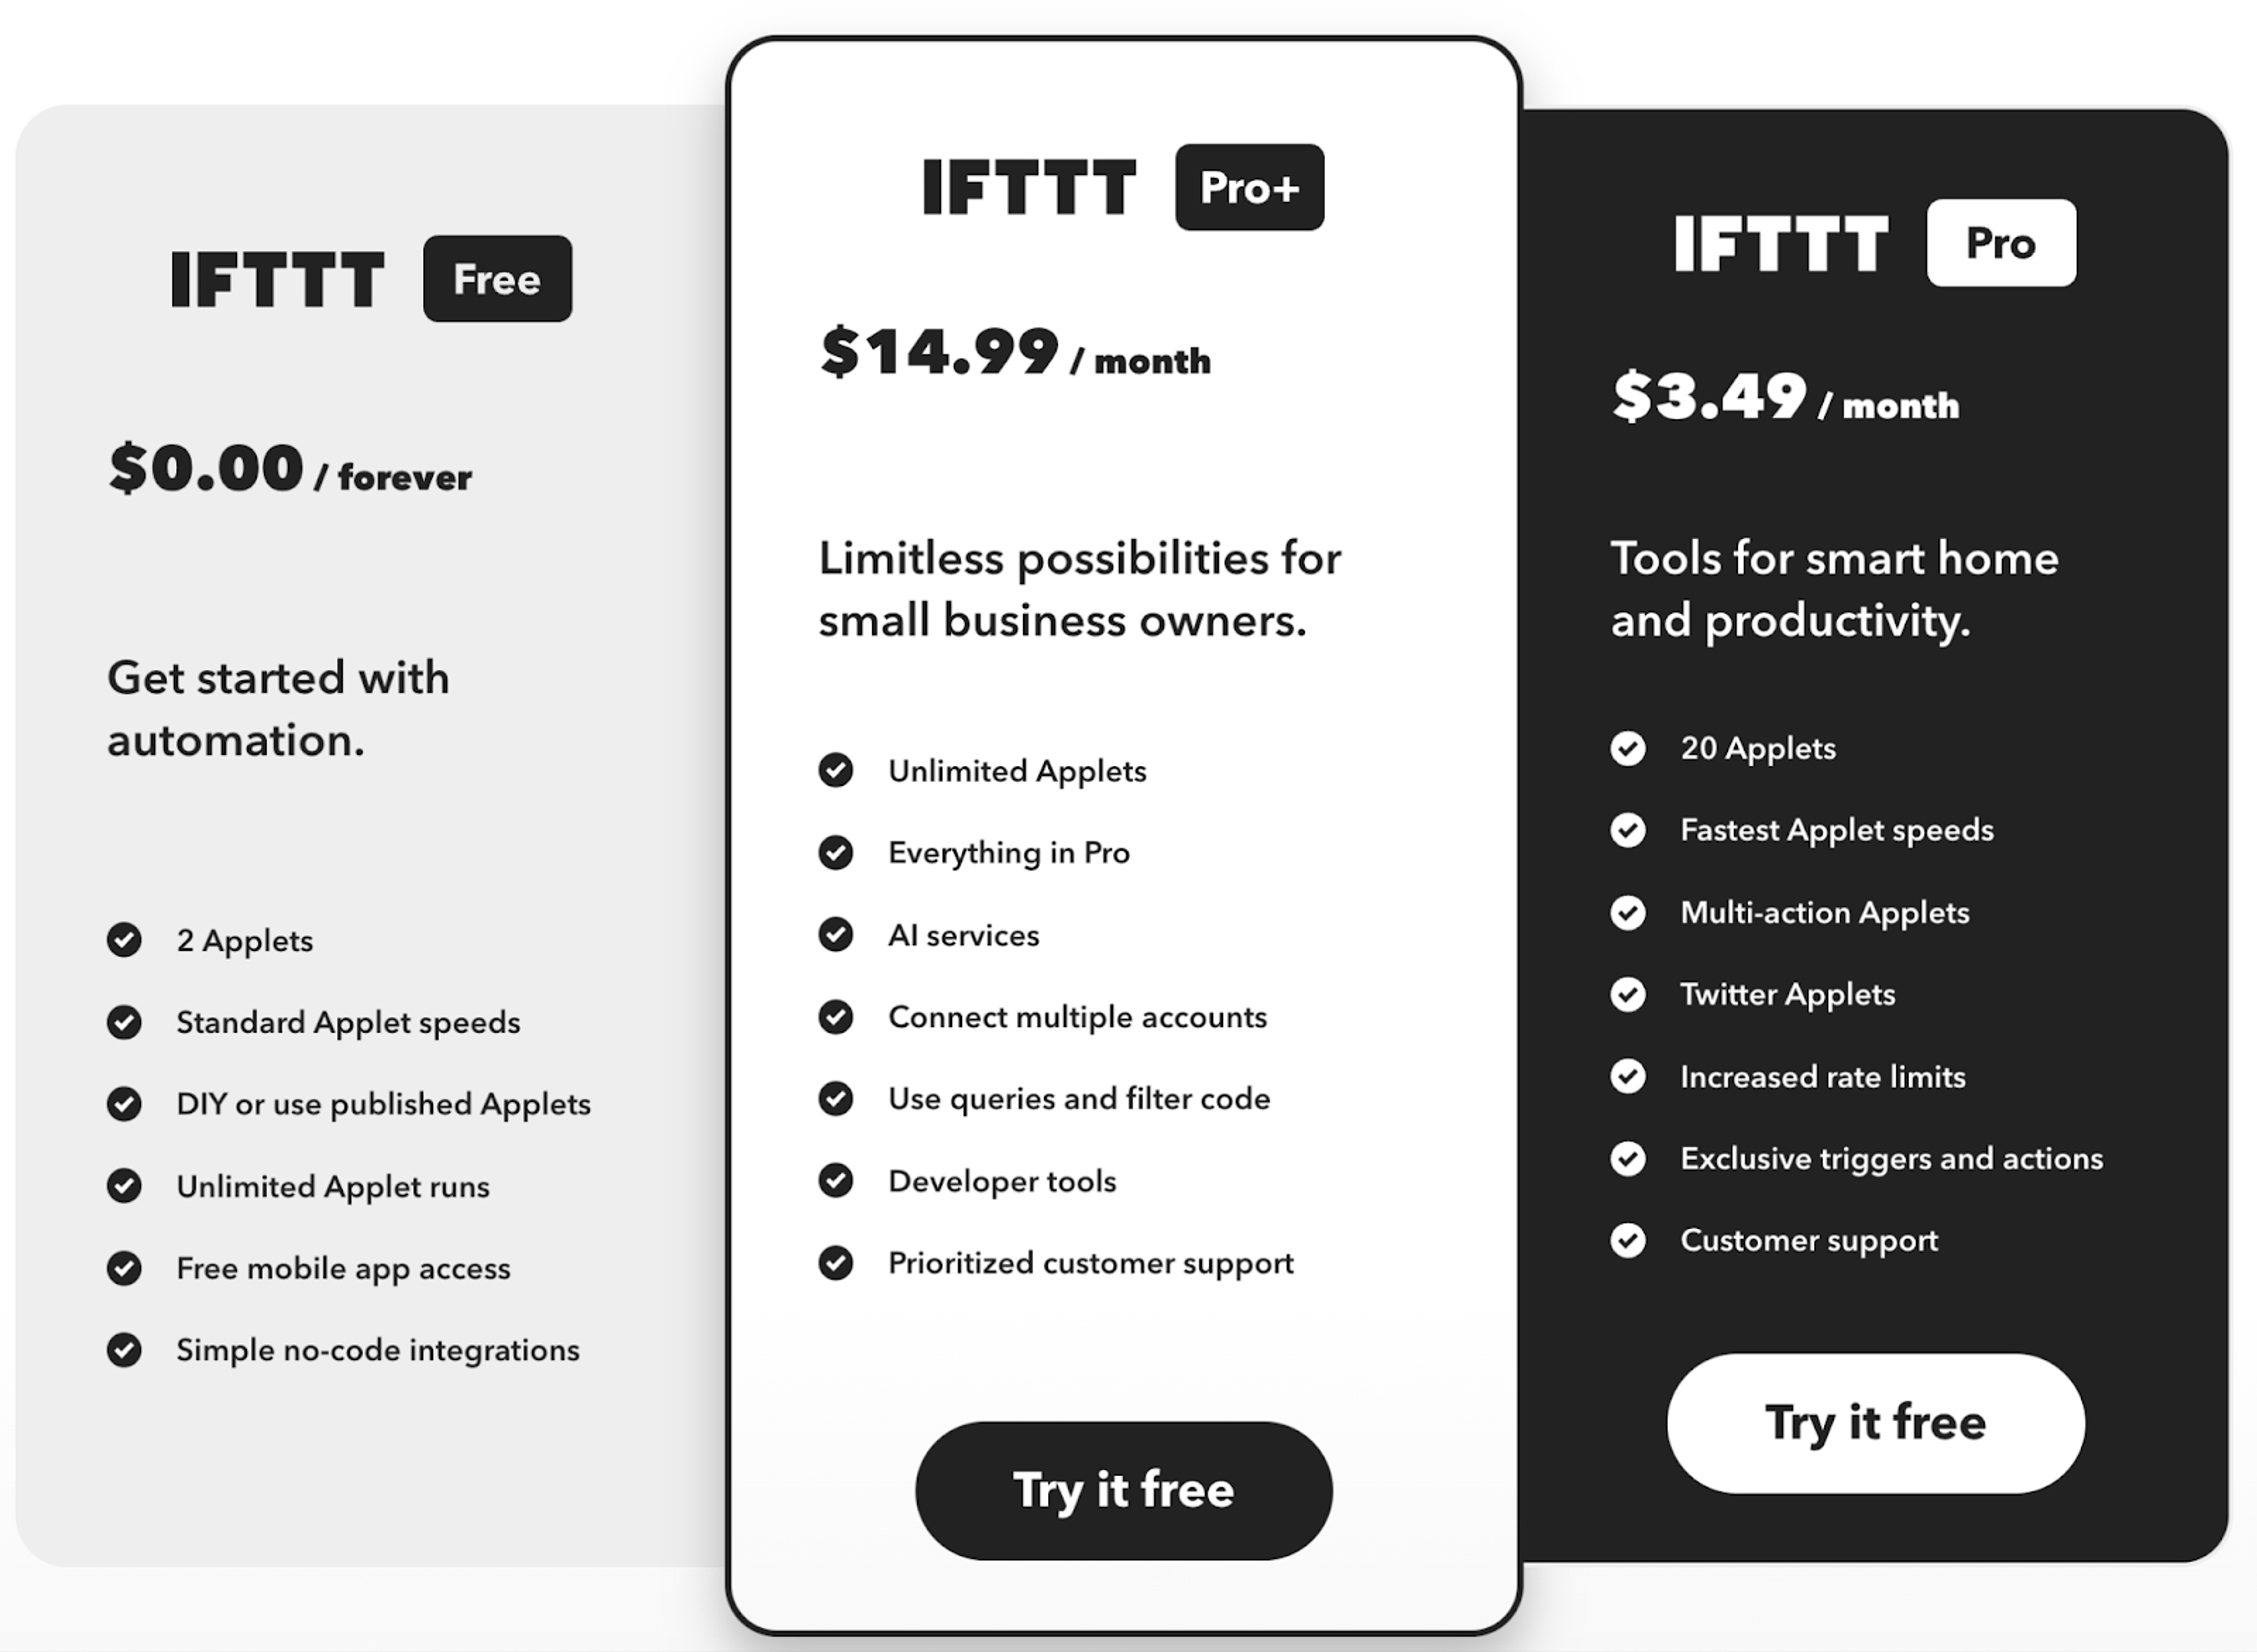 IFTTT pricing page